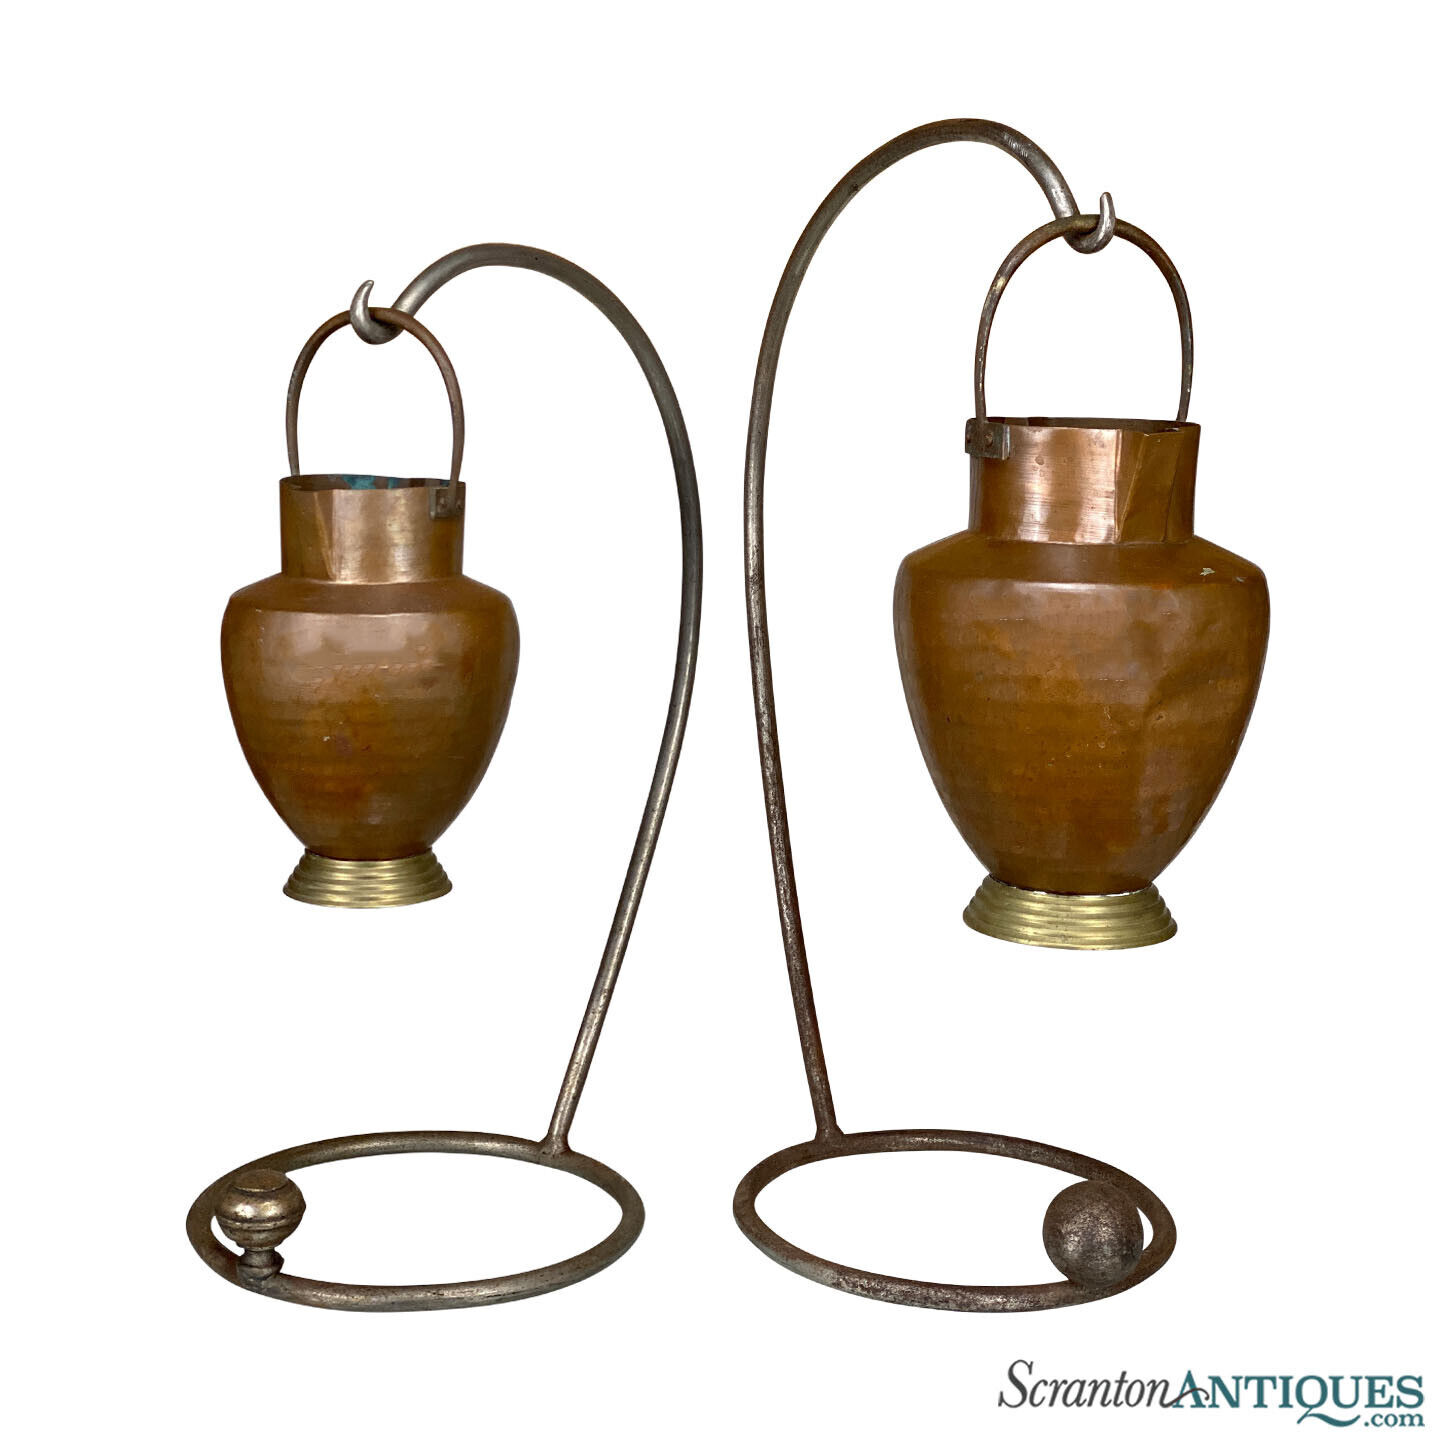 Antique Italian Farmhouse Hammered Copper Hanging Pitchers - A Pair